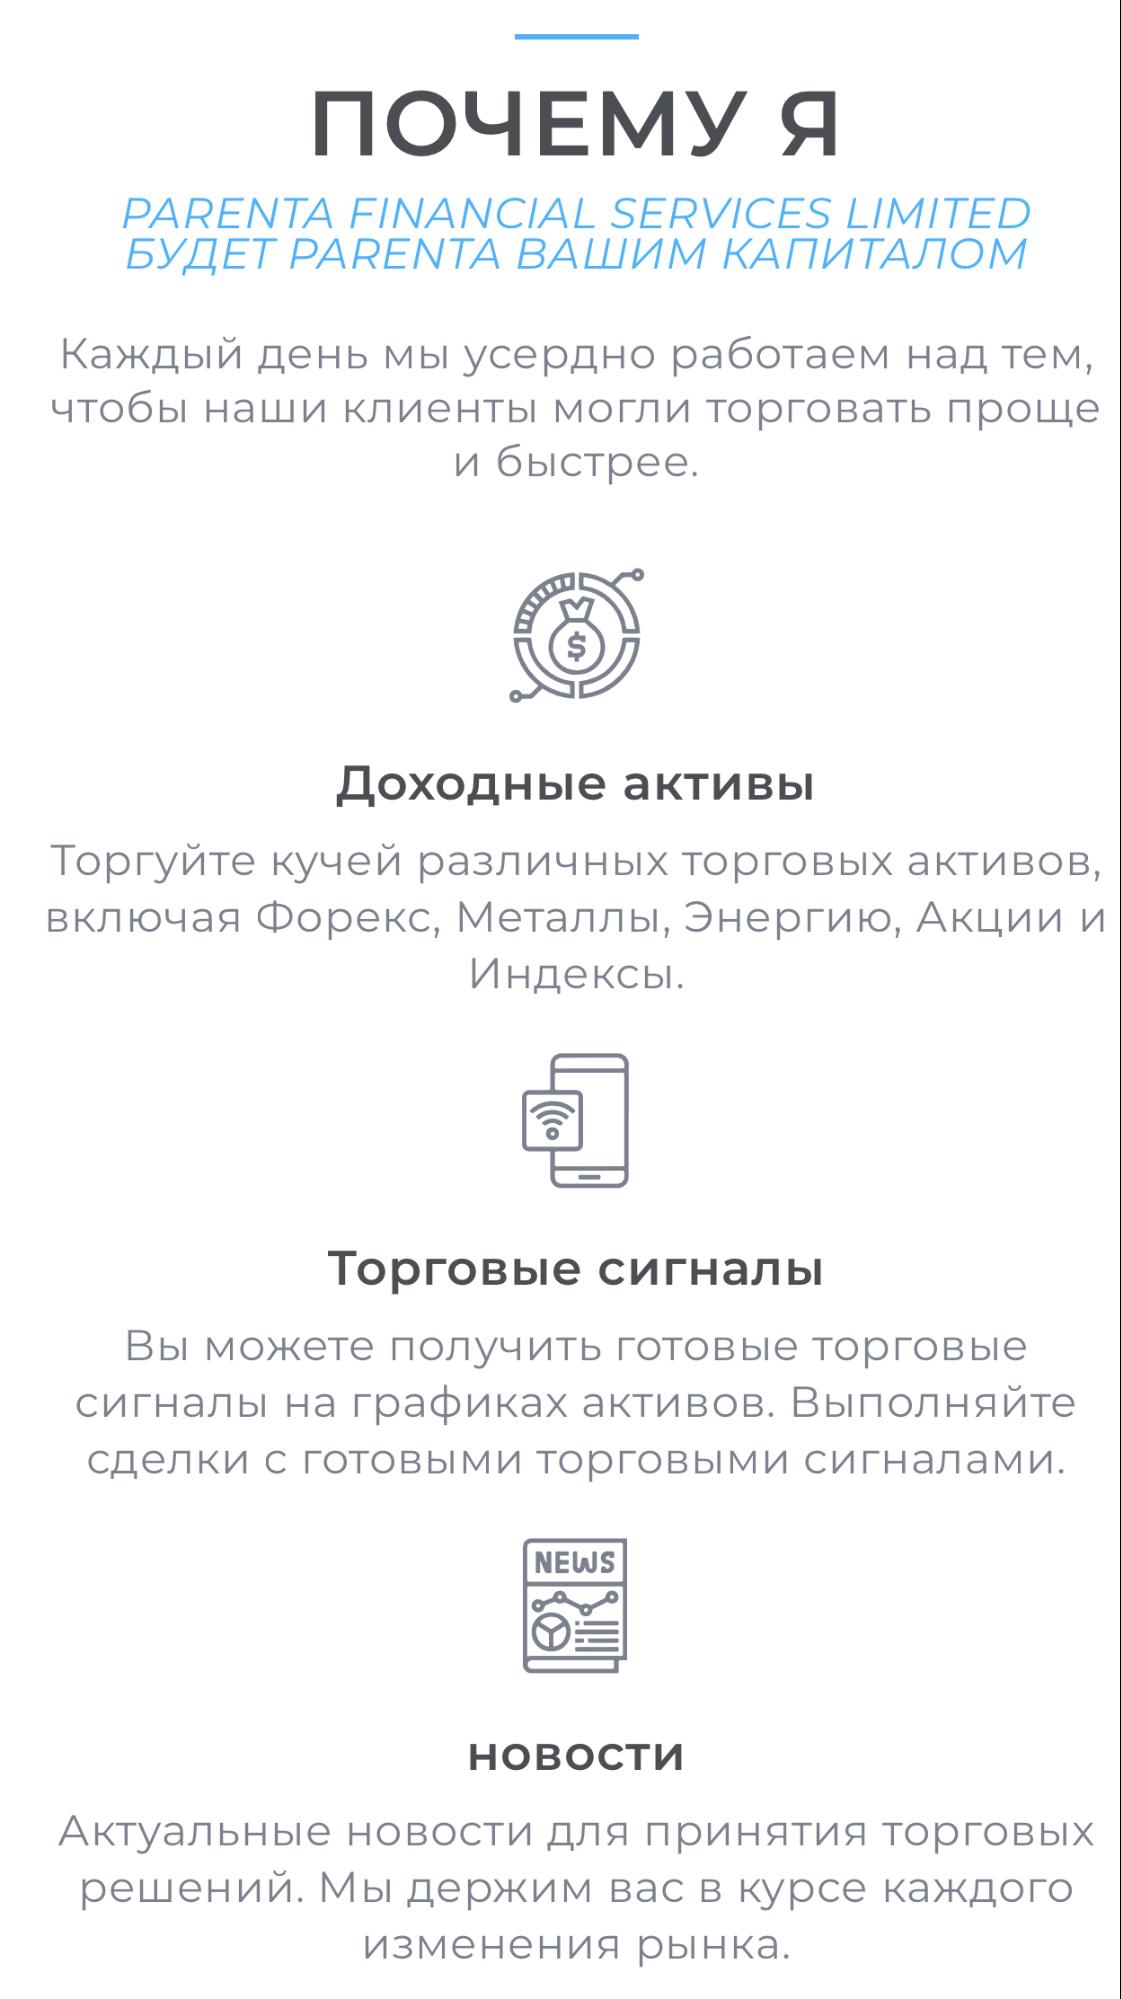 Parenta financial services limited сайт